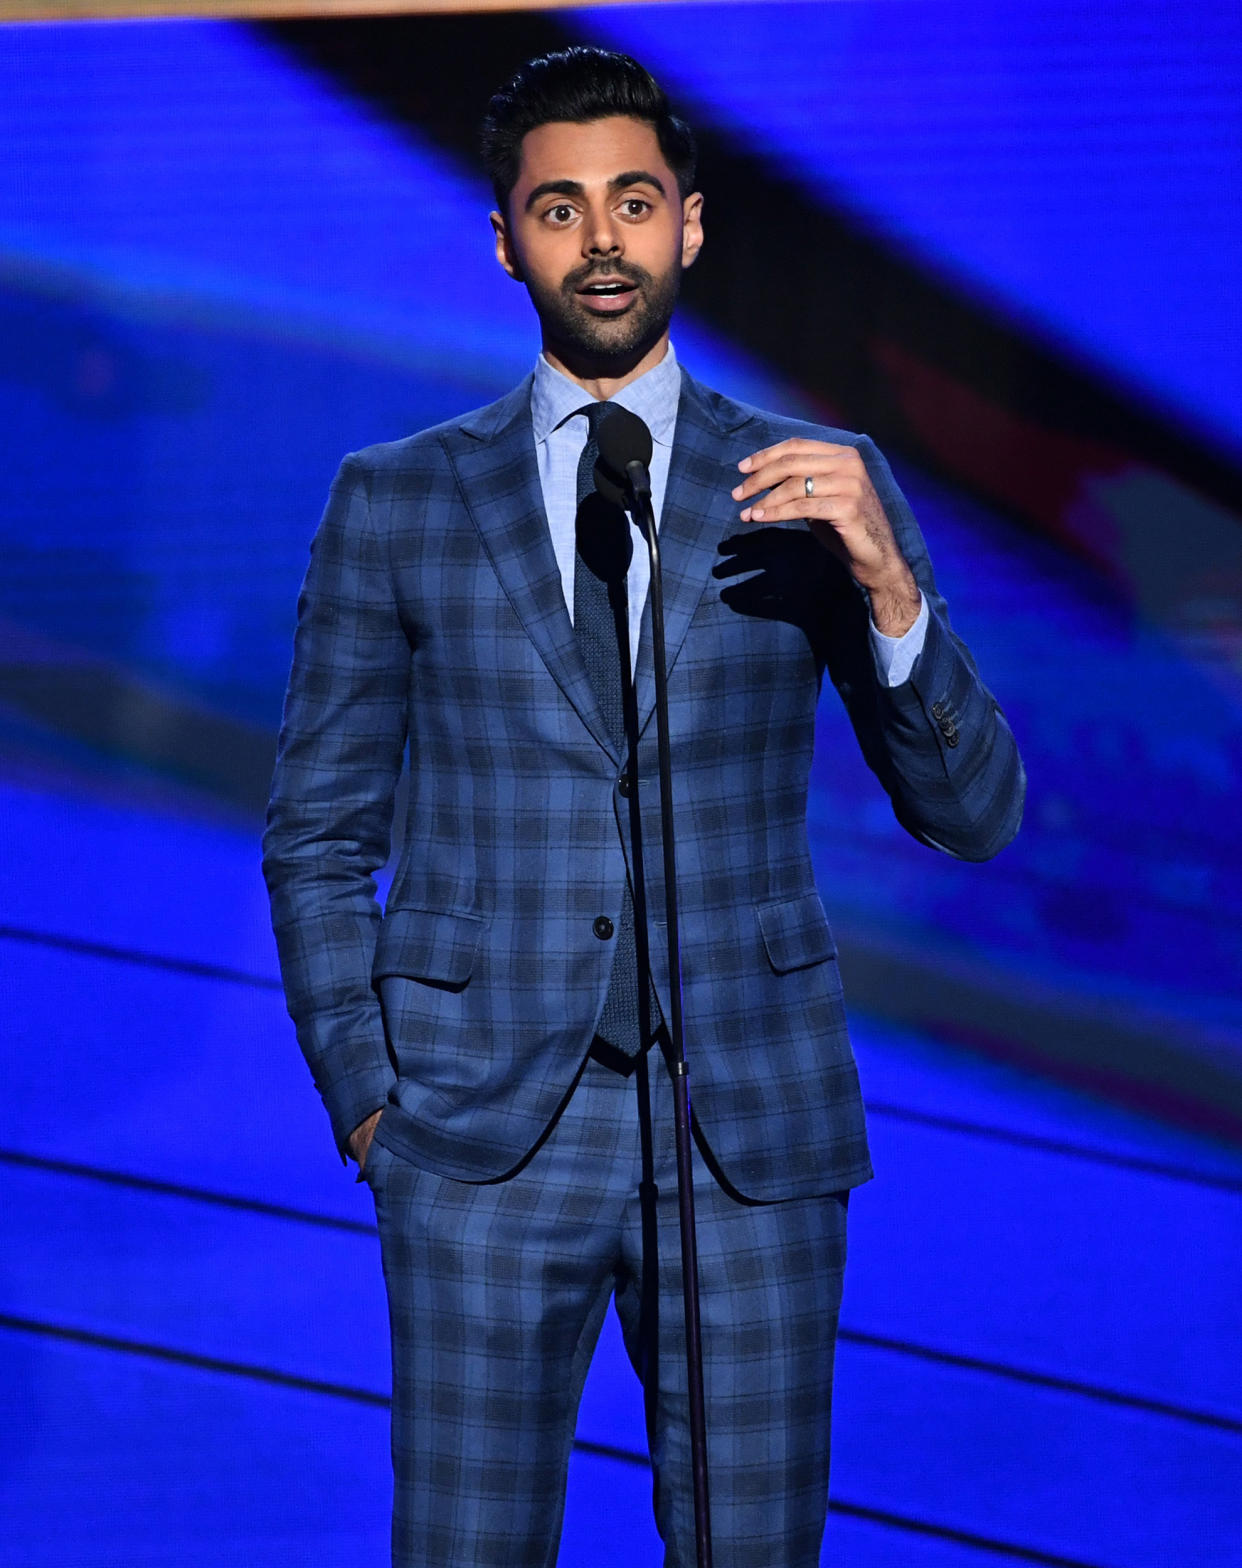 Image: 2019 NBA Awards Presented By Kia On TNT - Inside (Kevin Winter / Getty Images for Turner Sports)